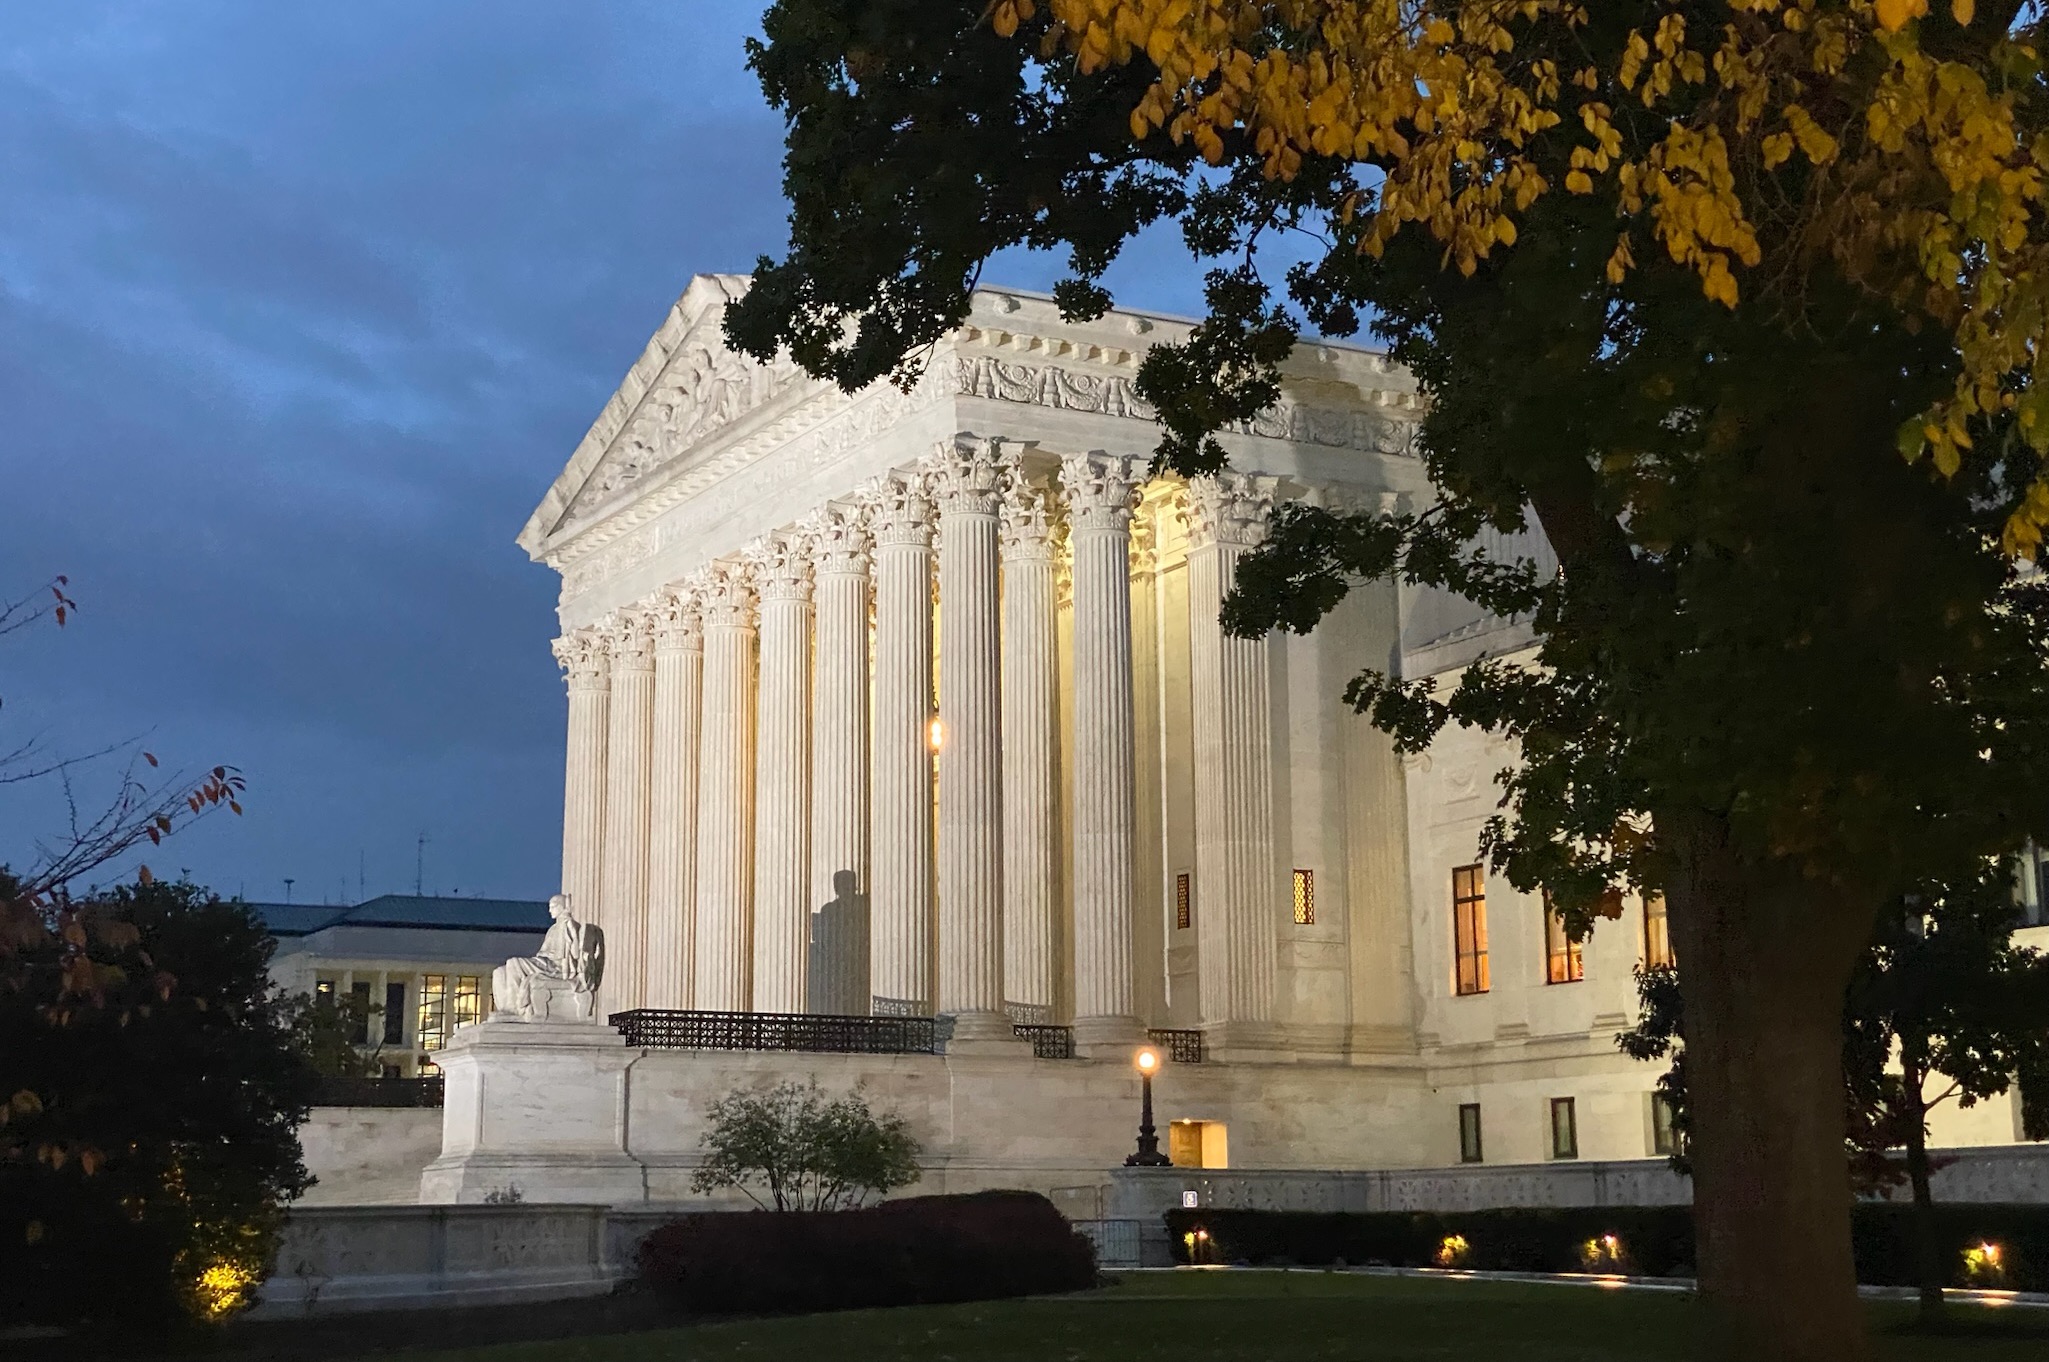 side view of supreme court building, illuminated against dark sky at dusk, with large tree in foreground